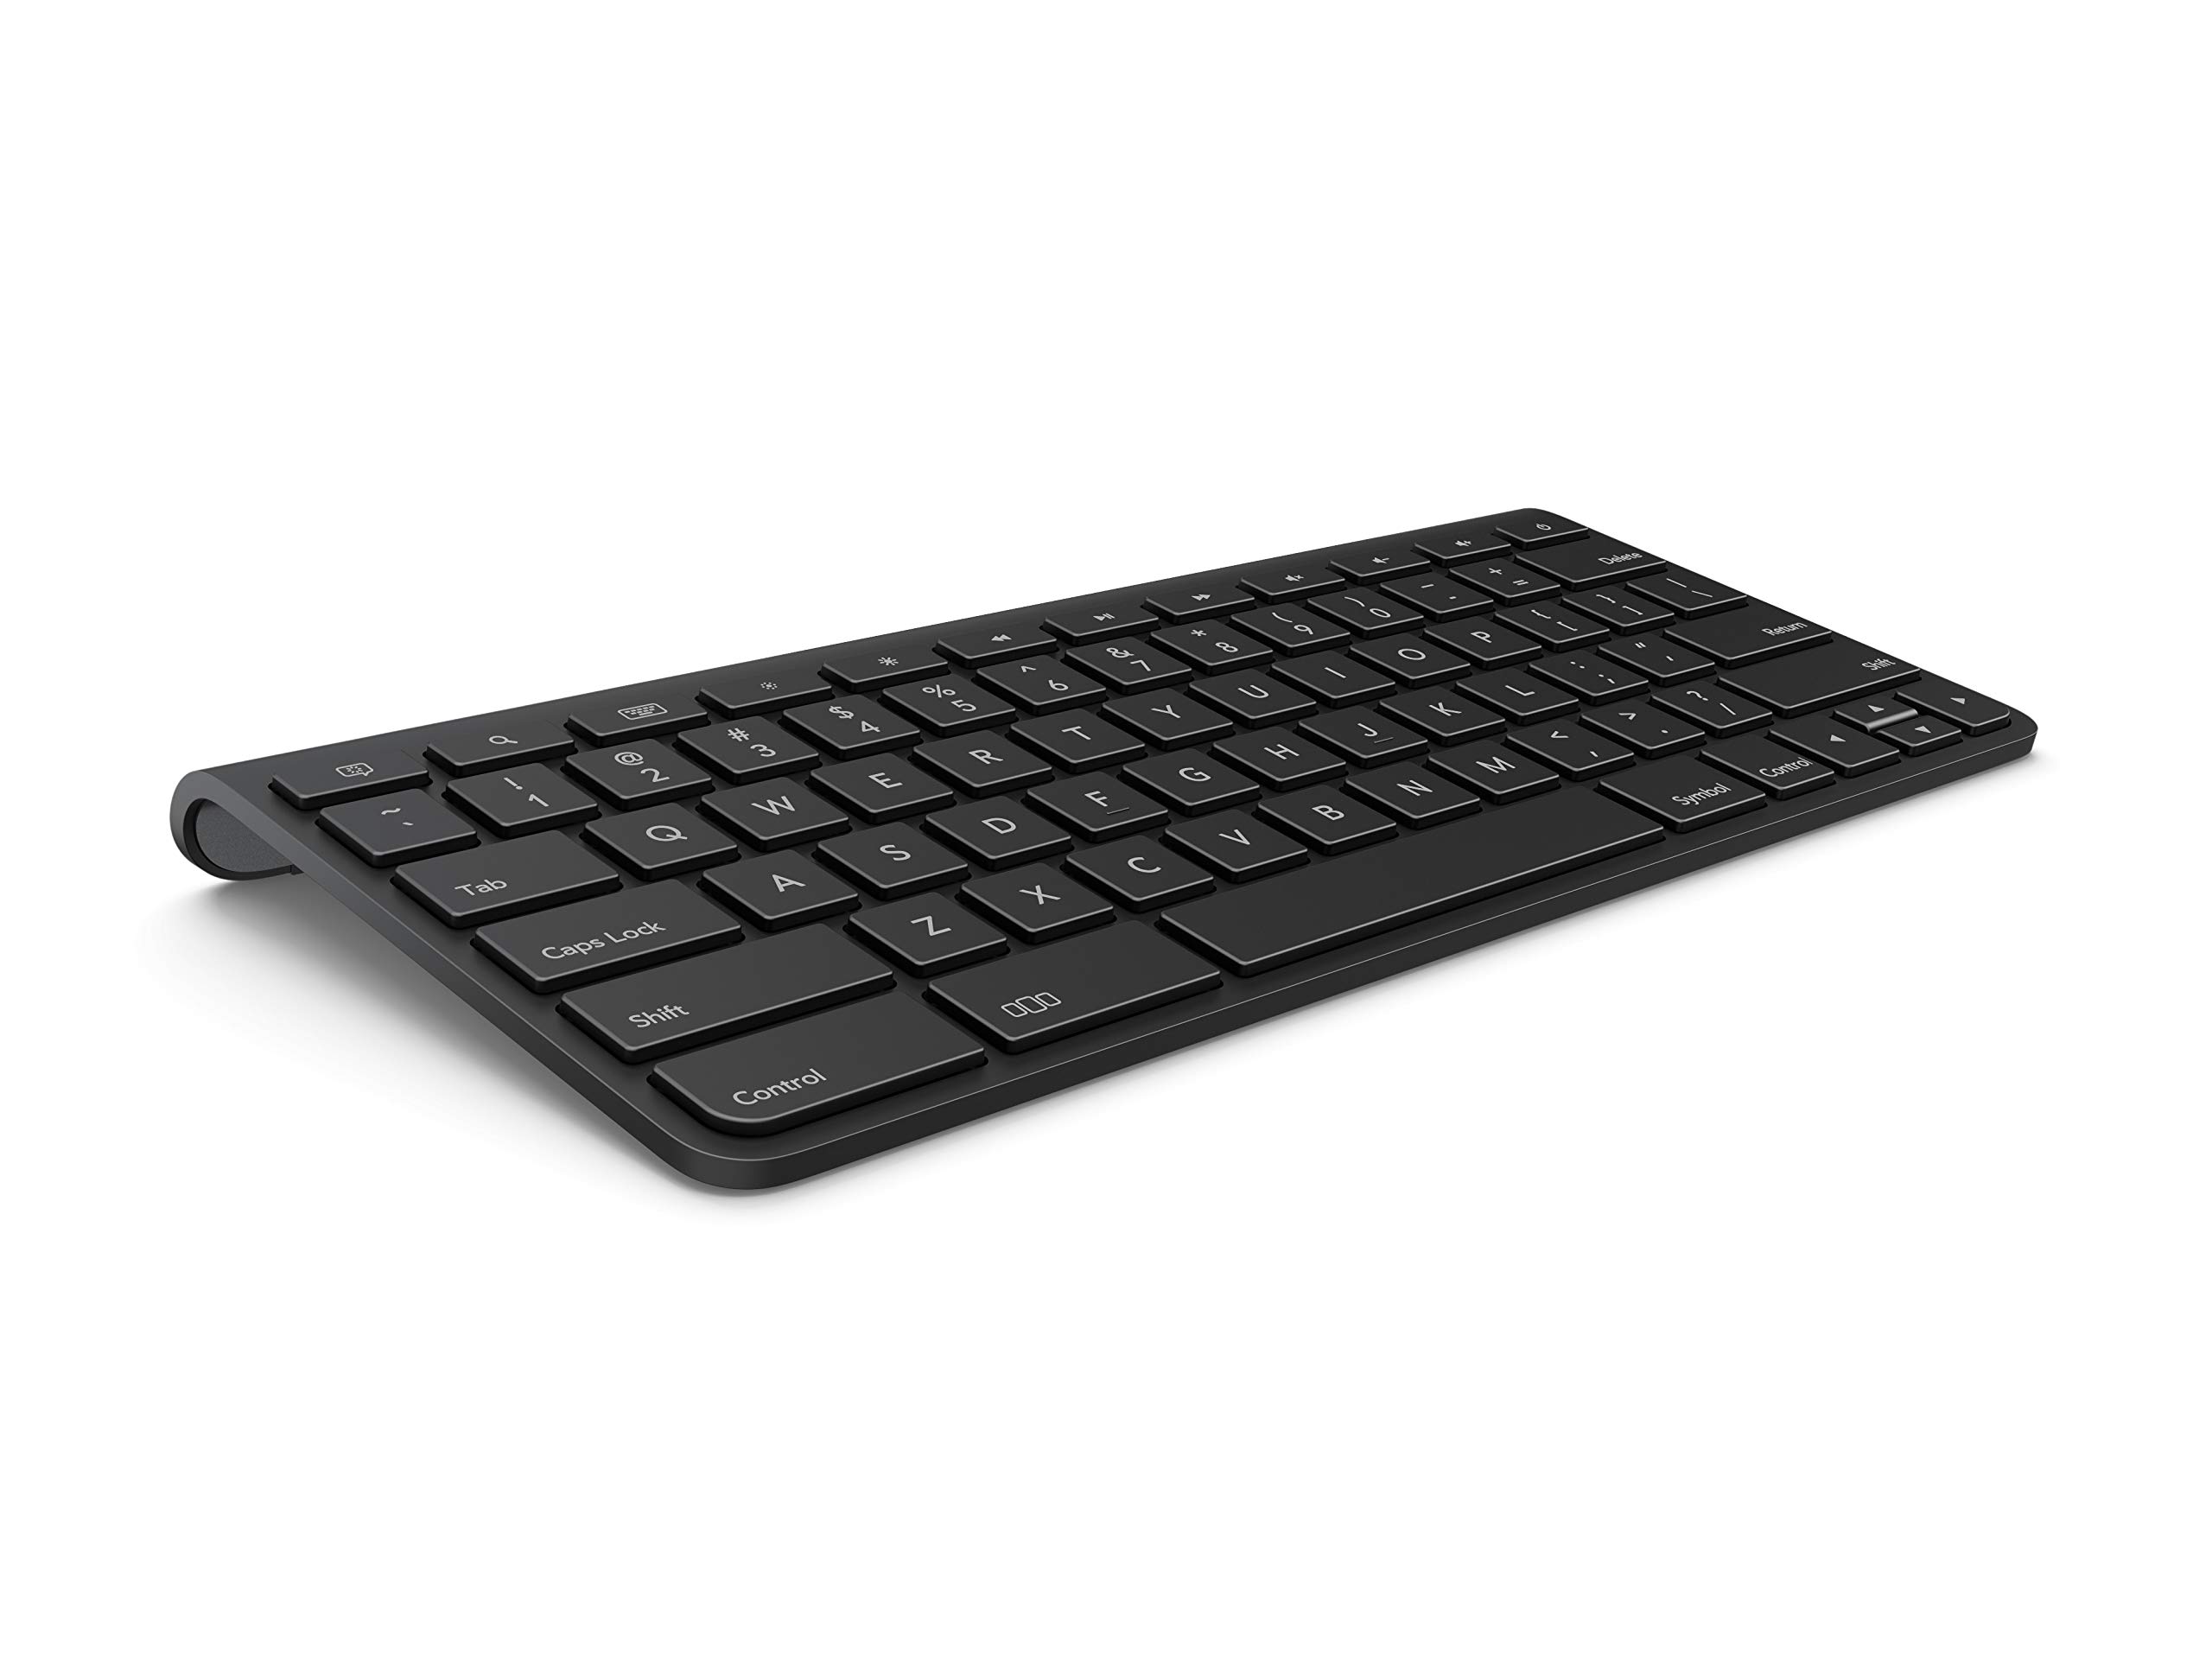 TouchPad and Keyboard